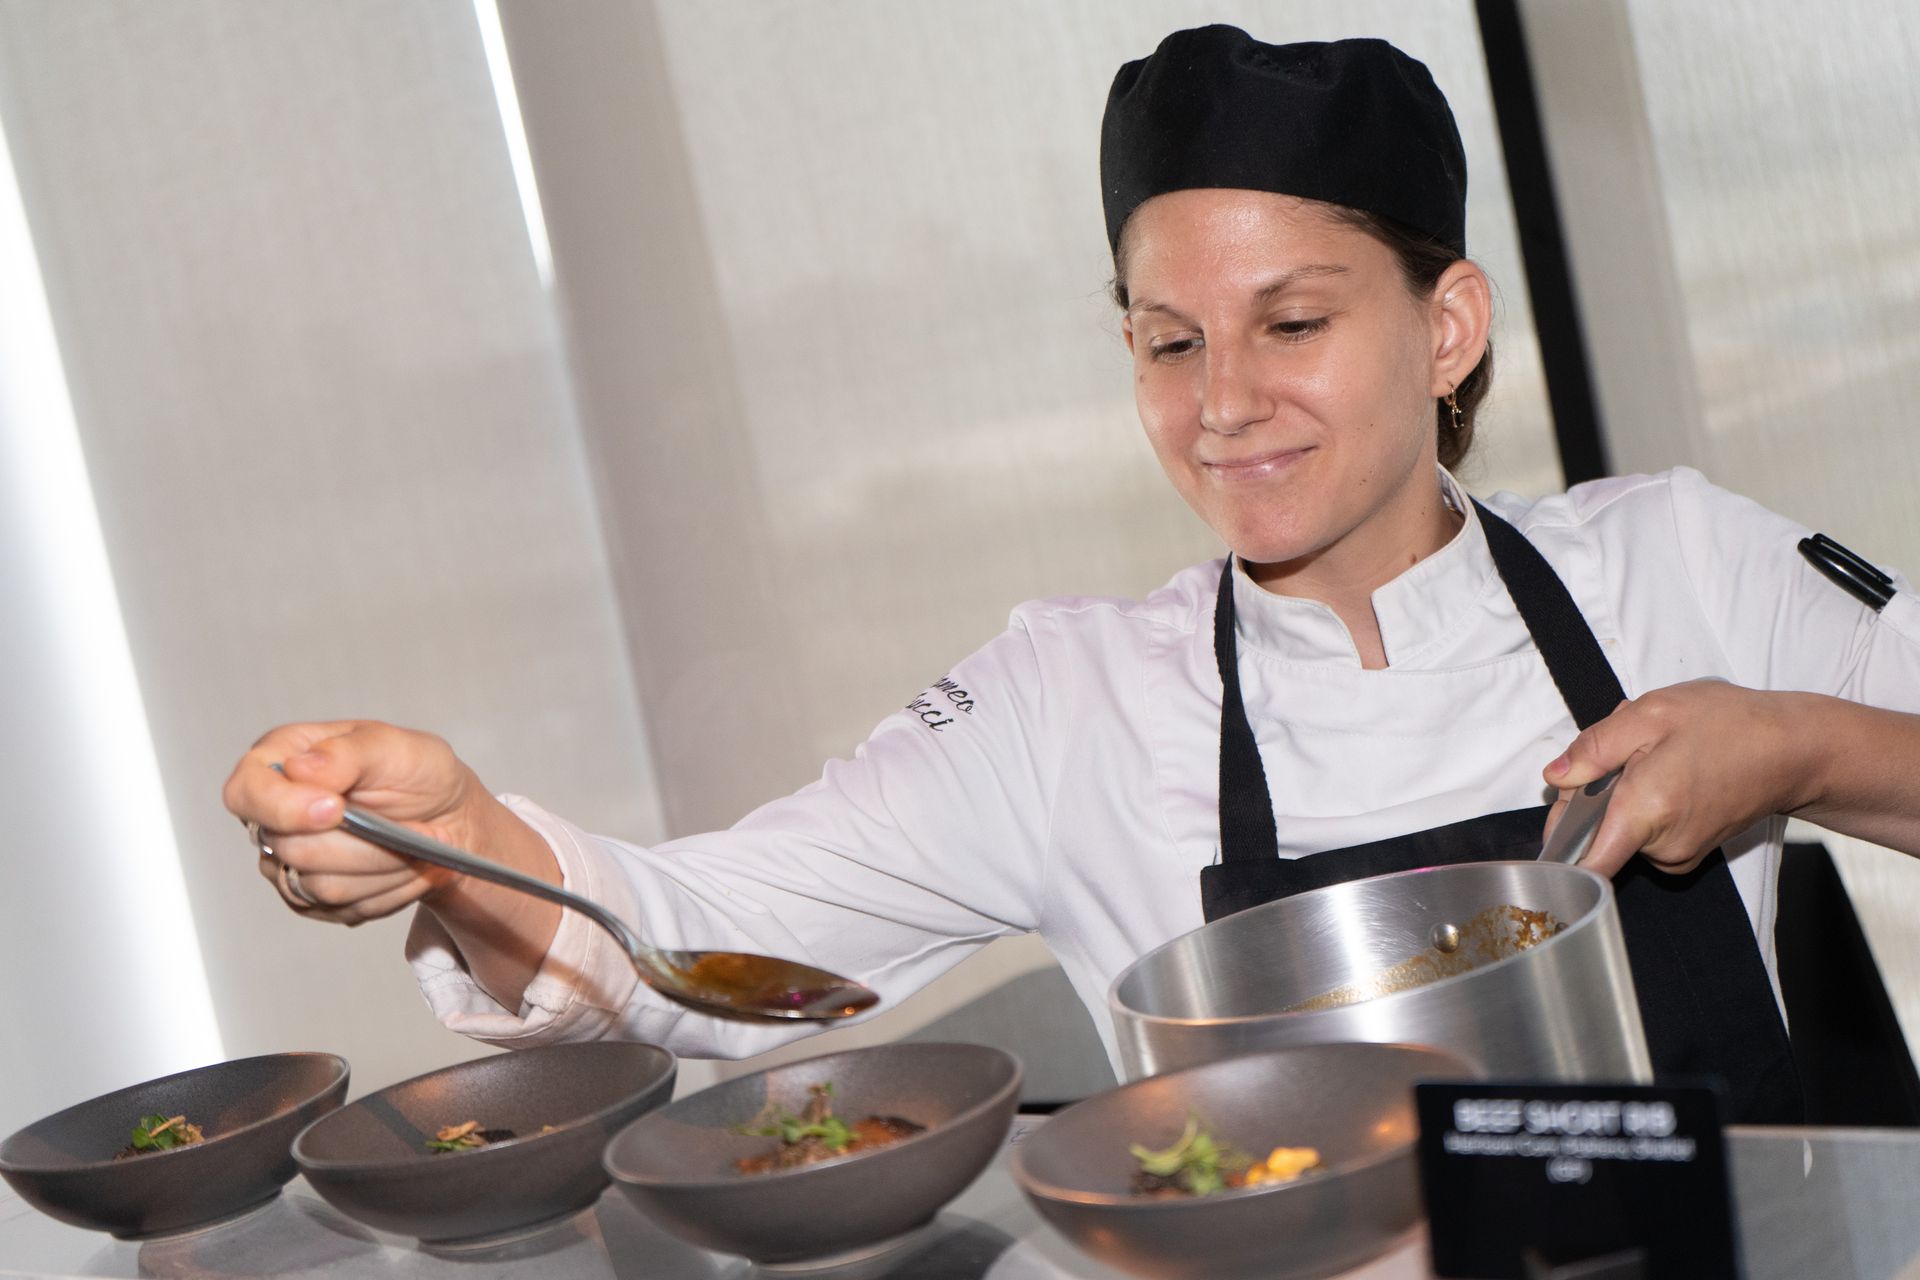 A woman in a chef 's uniform is preparing food in bowls.